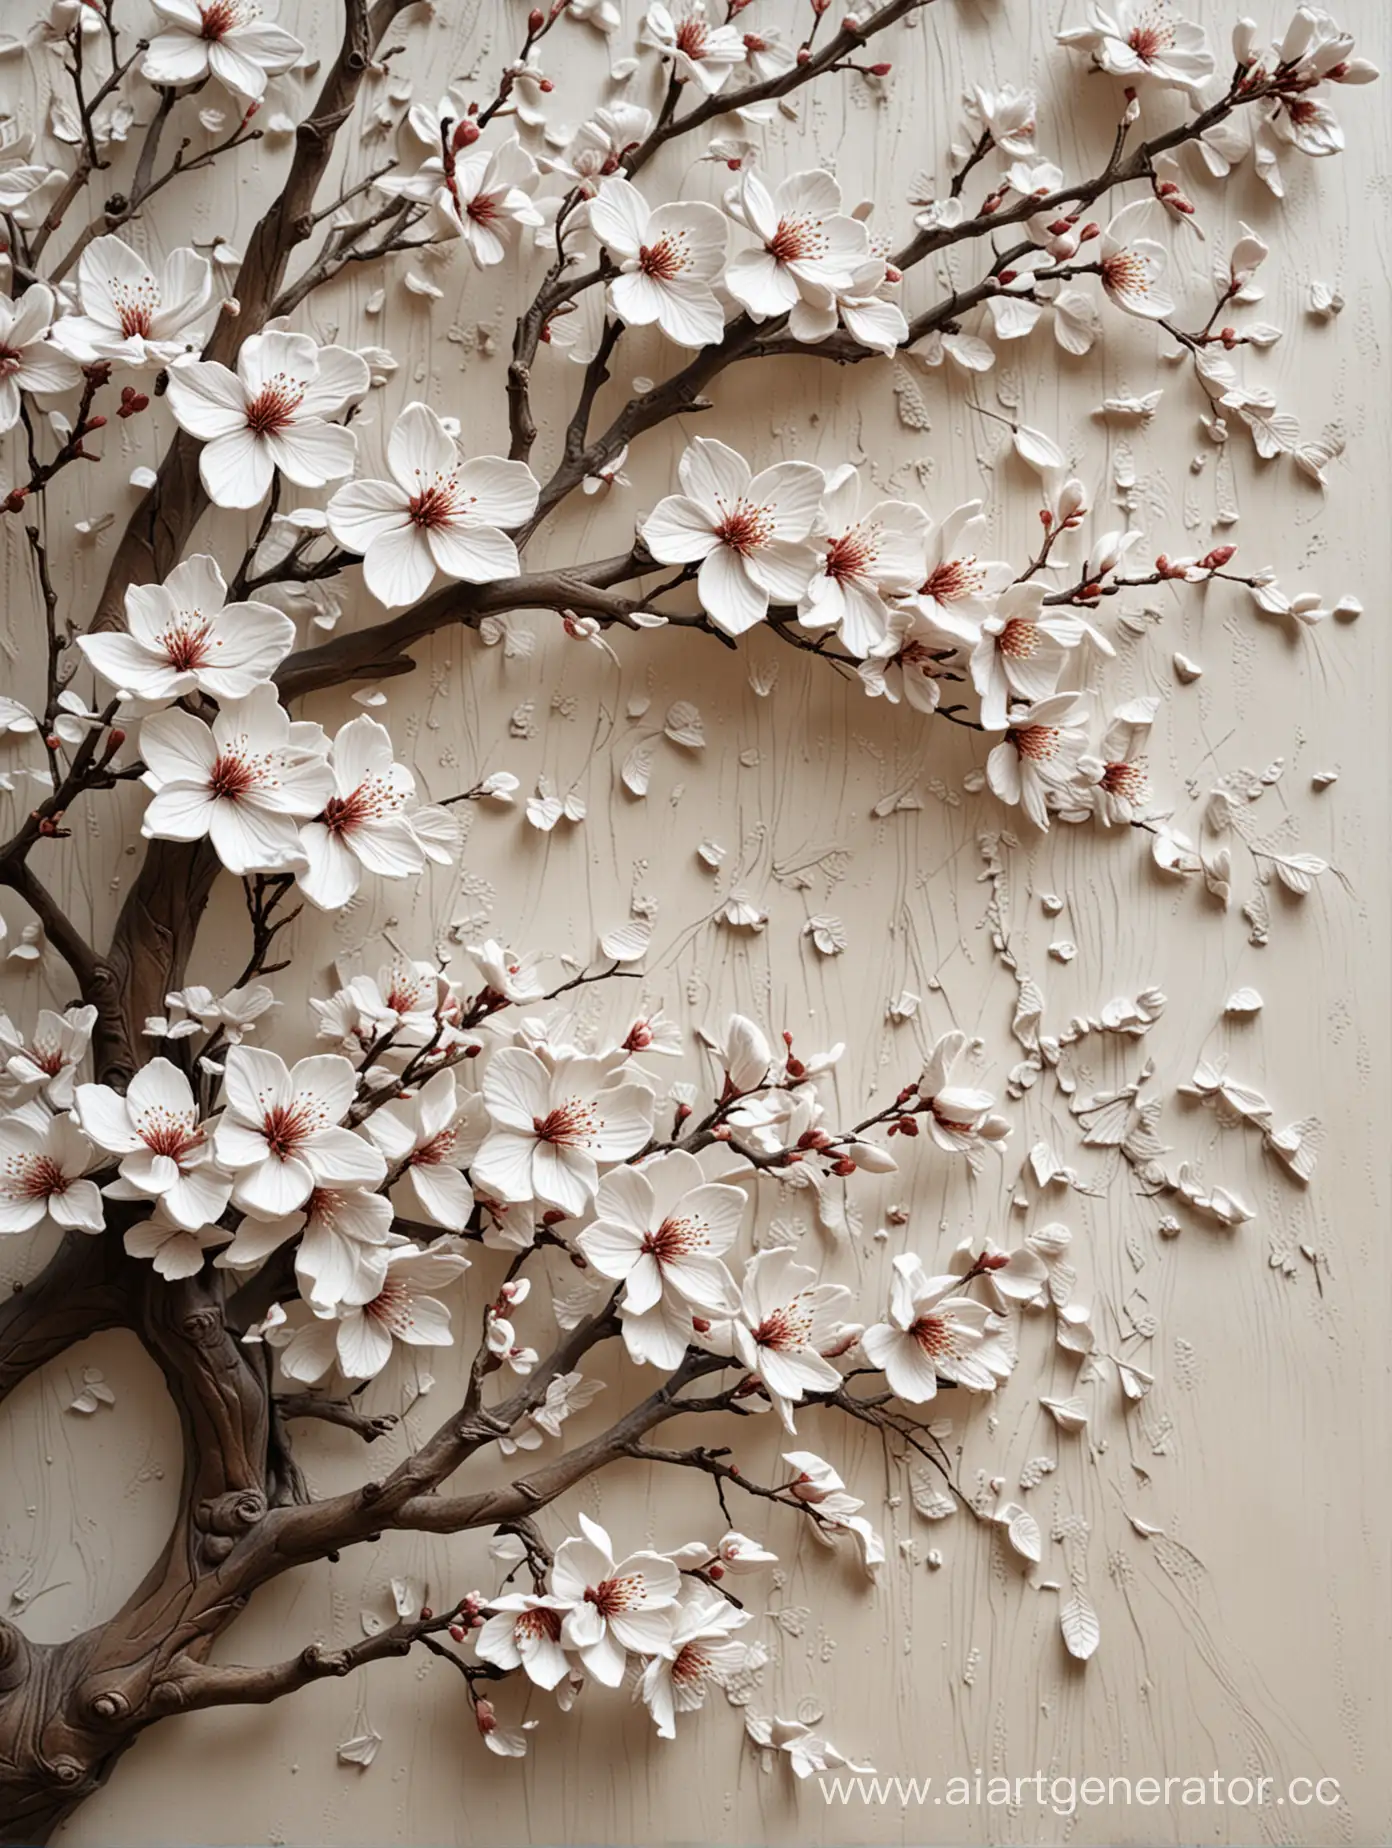 white basrelief sculpture of sakura flowers on big old branches